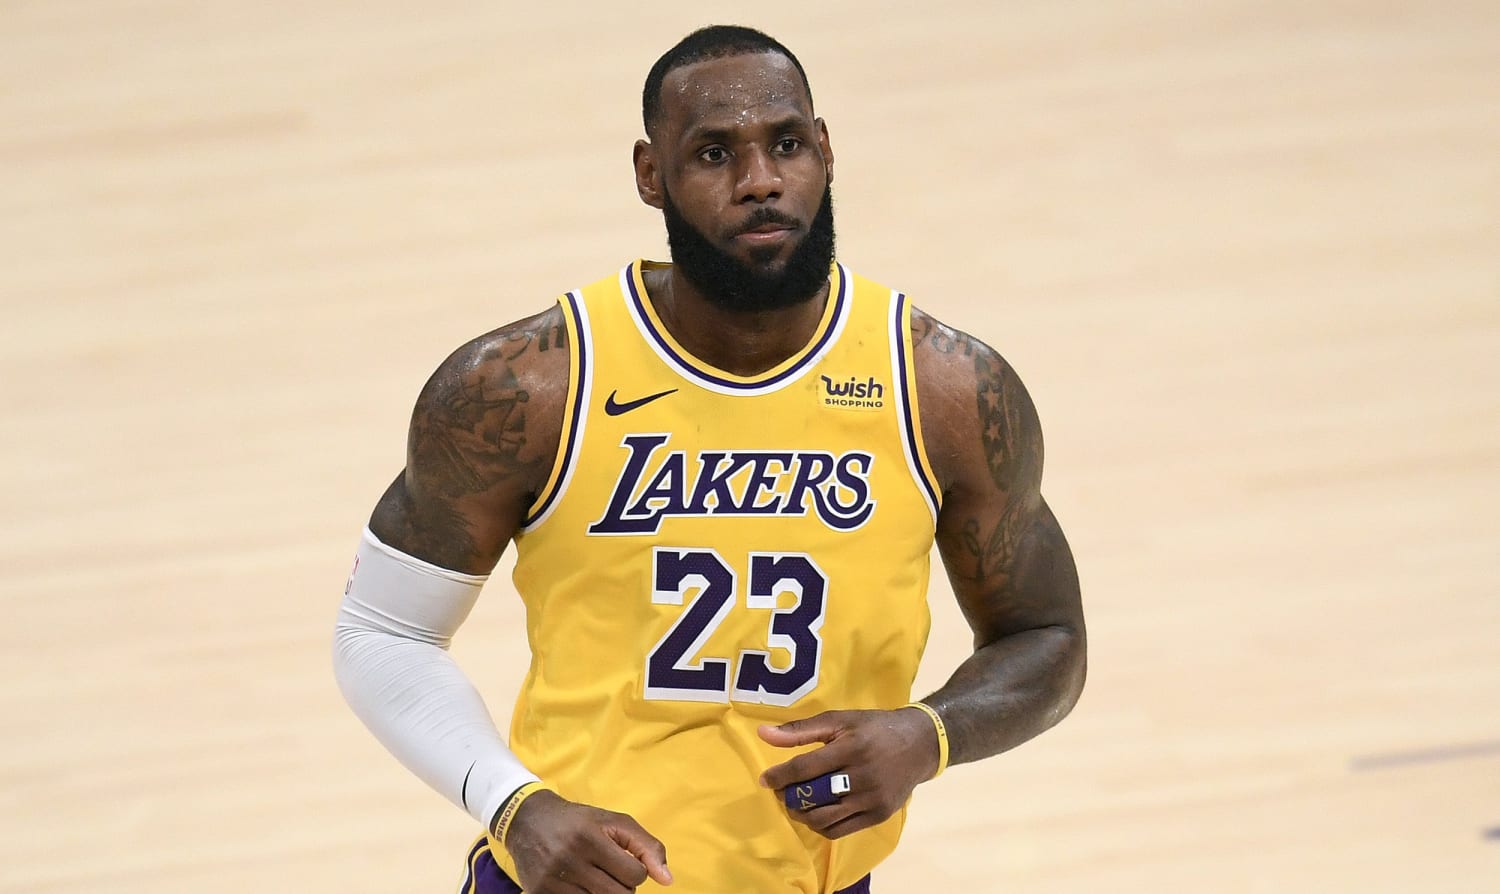 Lakers News: LeBron James Changing Jersey Number Out Of Respect